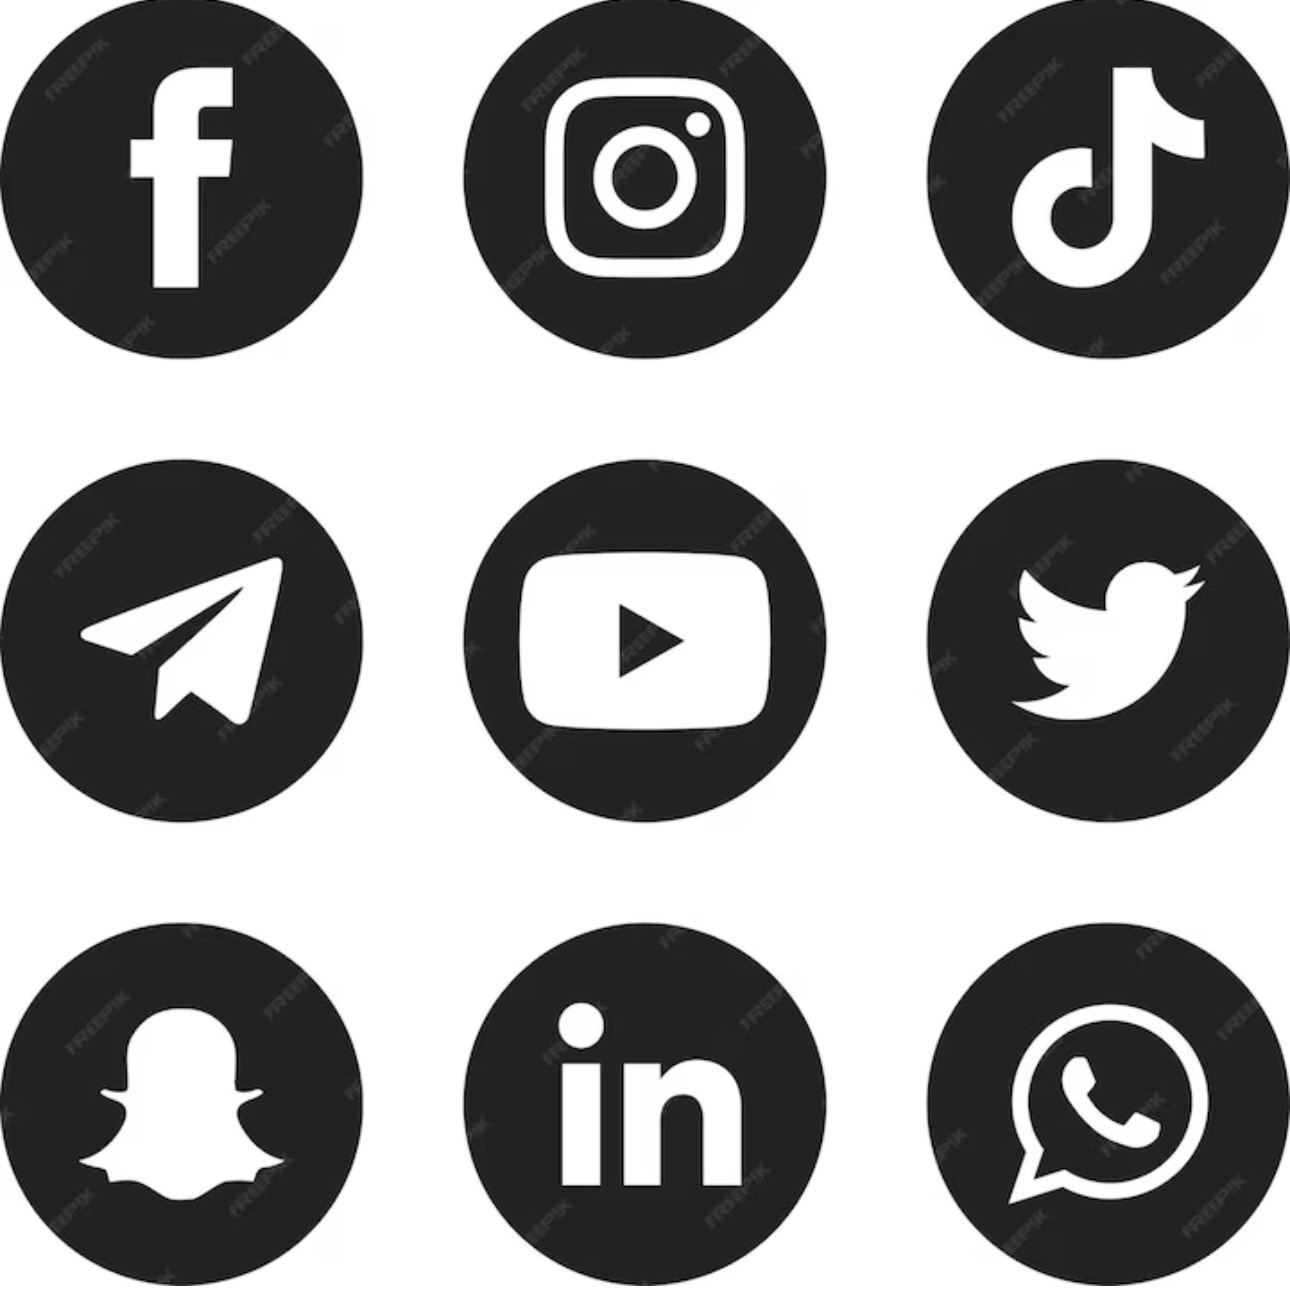 Black and white icons of the social network logos, from top left, facebook, instagram, tiktok, a paper plane, youtube, twitter, snapchat, linkedin, whatsapp